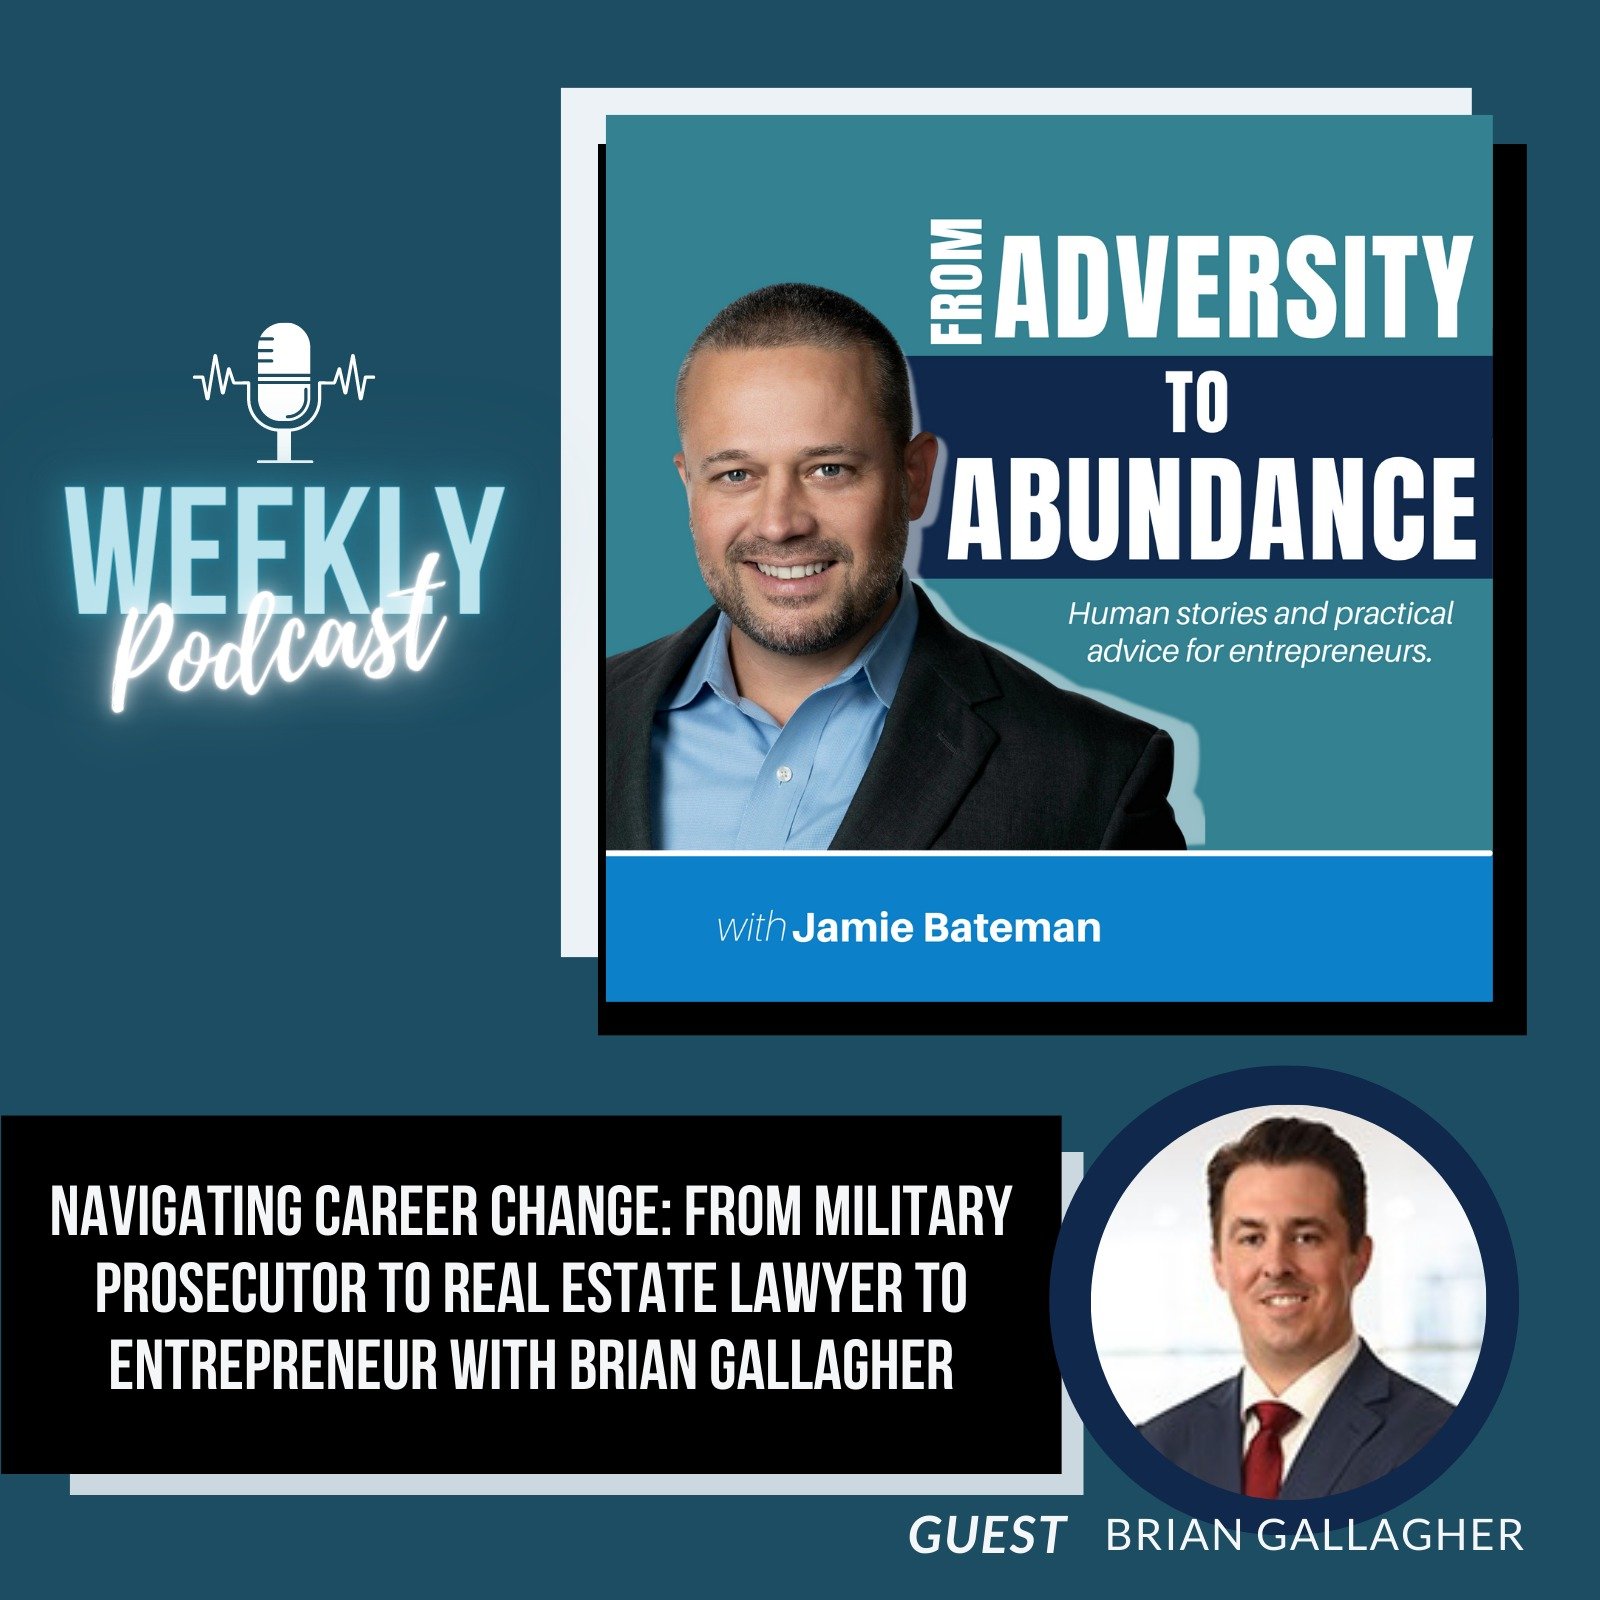 Navigating Career Change: From Military Prosecutor to Real Estate Lawyer to Entrepreneur with Brian Gallagher